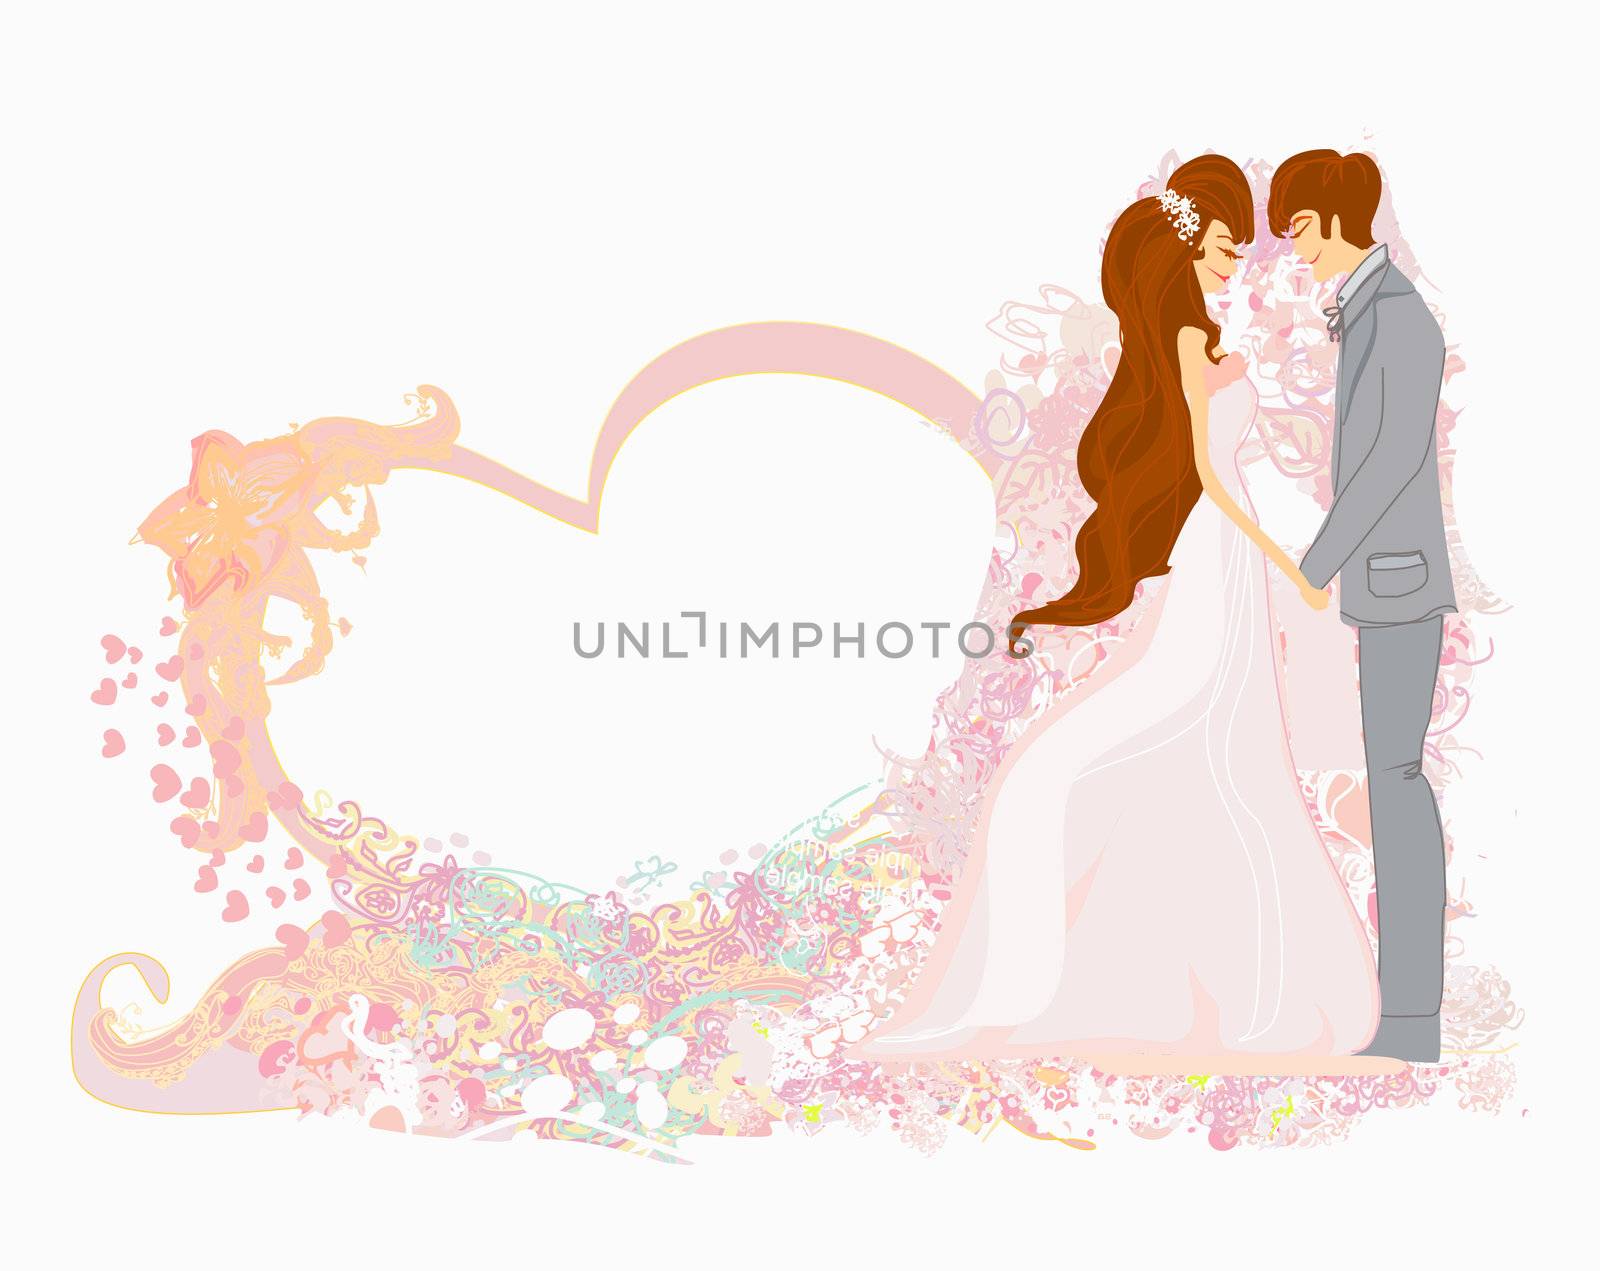 greeting card with silhouette of romantic couple